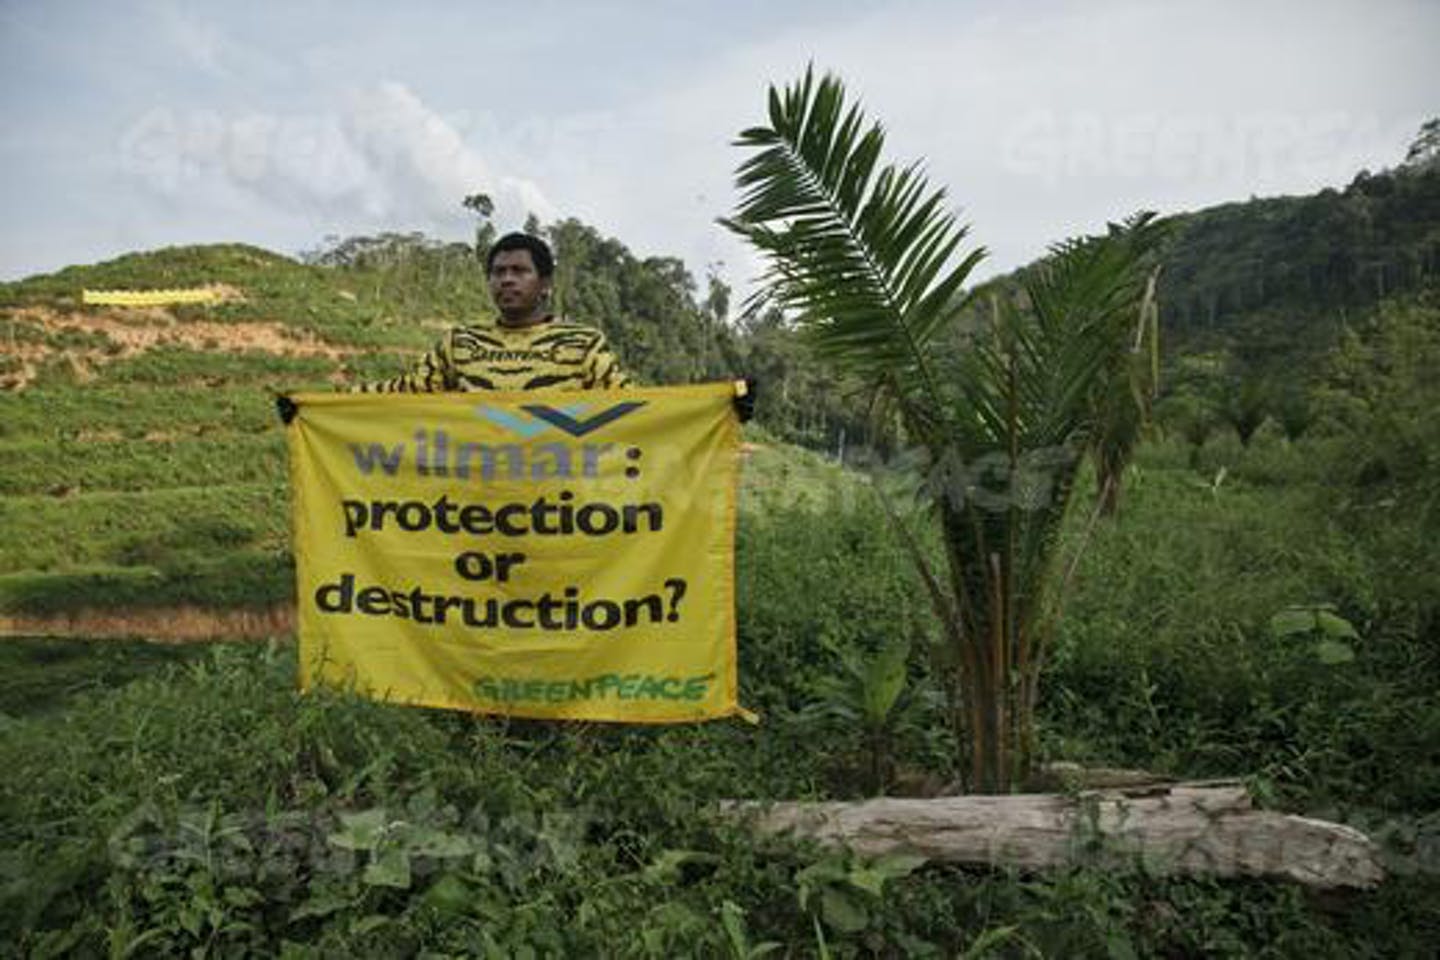 Wilmar responsible for palm oil deforestation despite supposedly using "sustainable" palm oil.